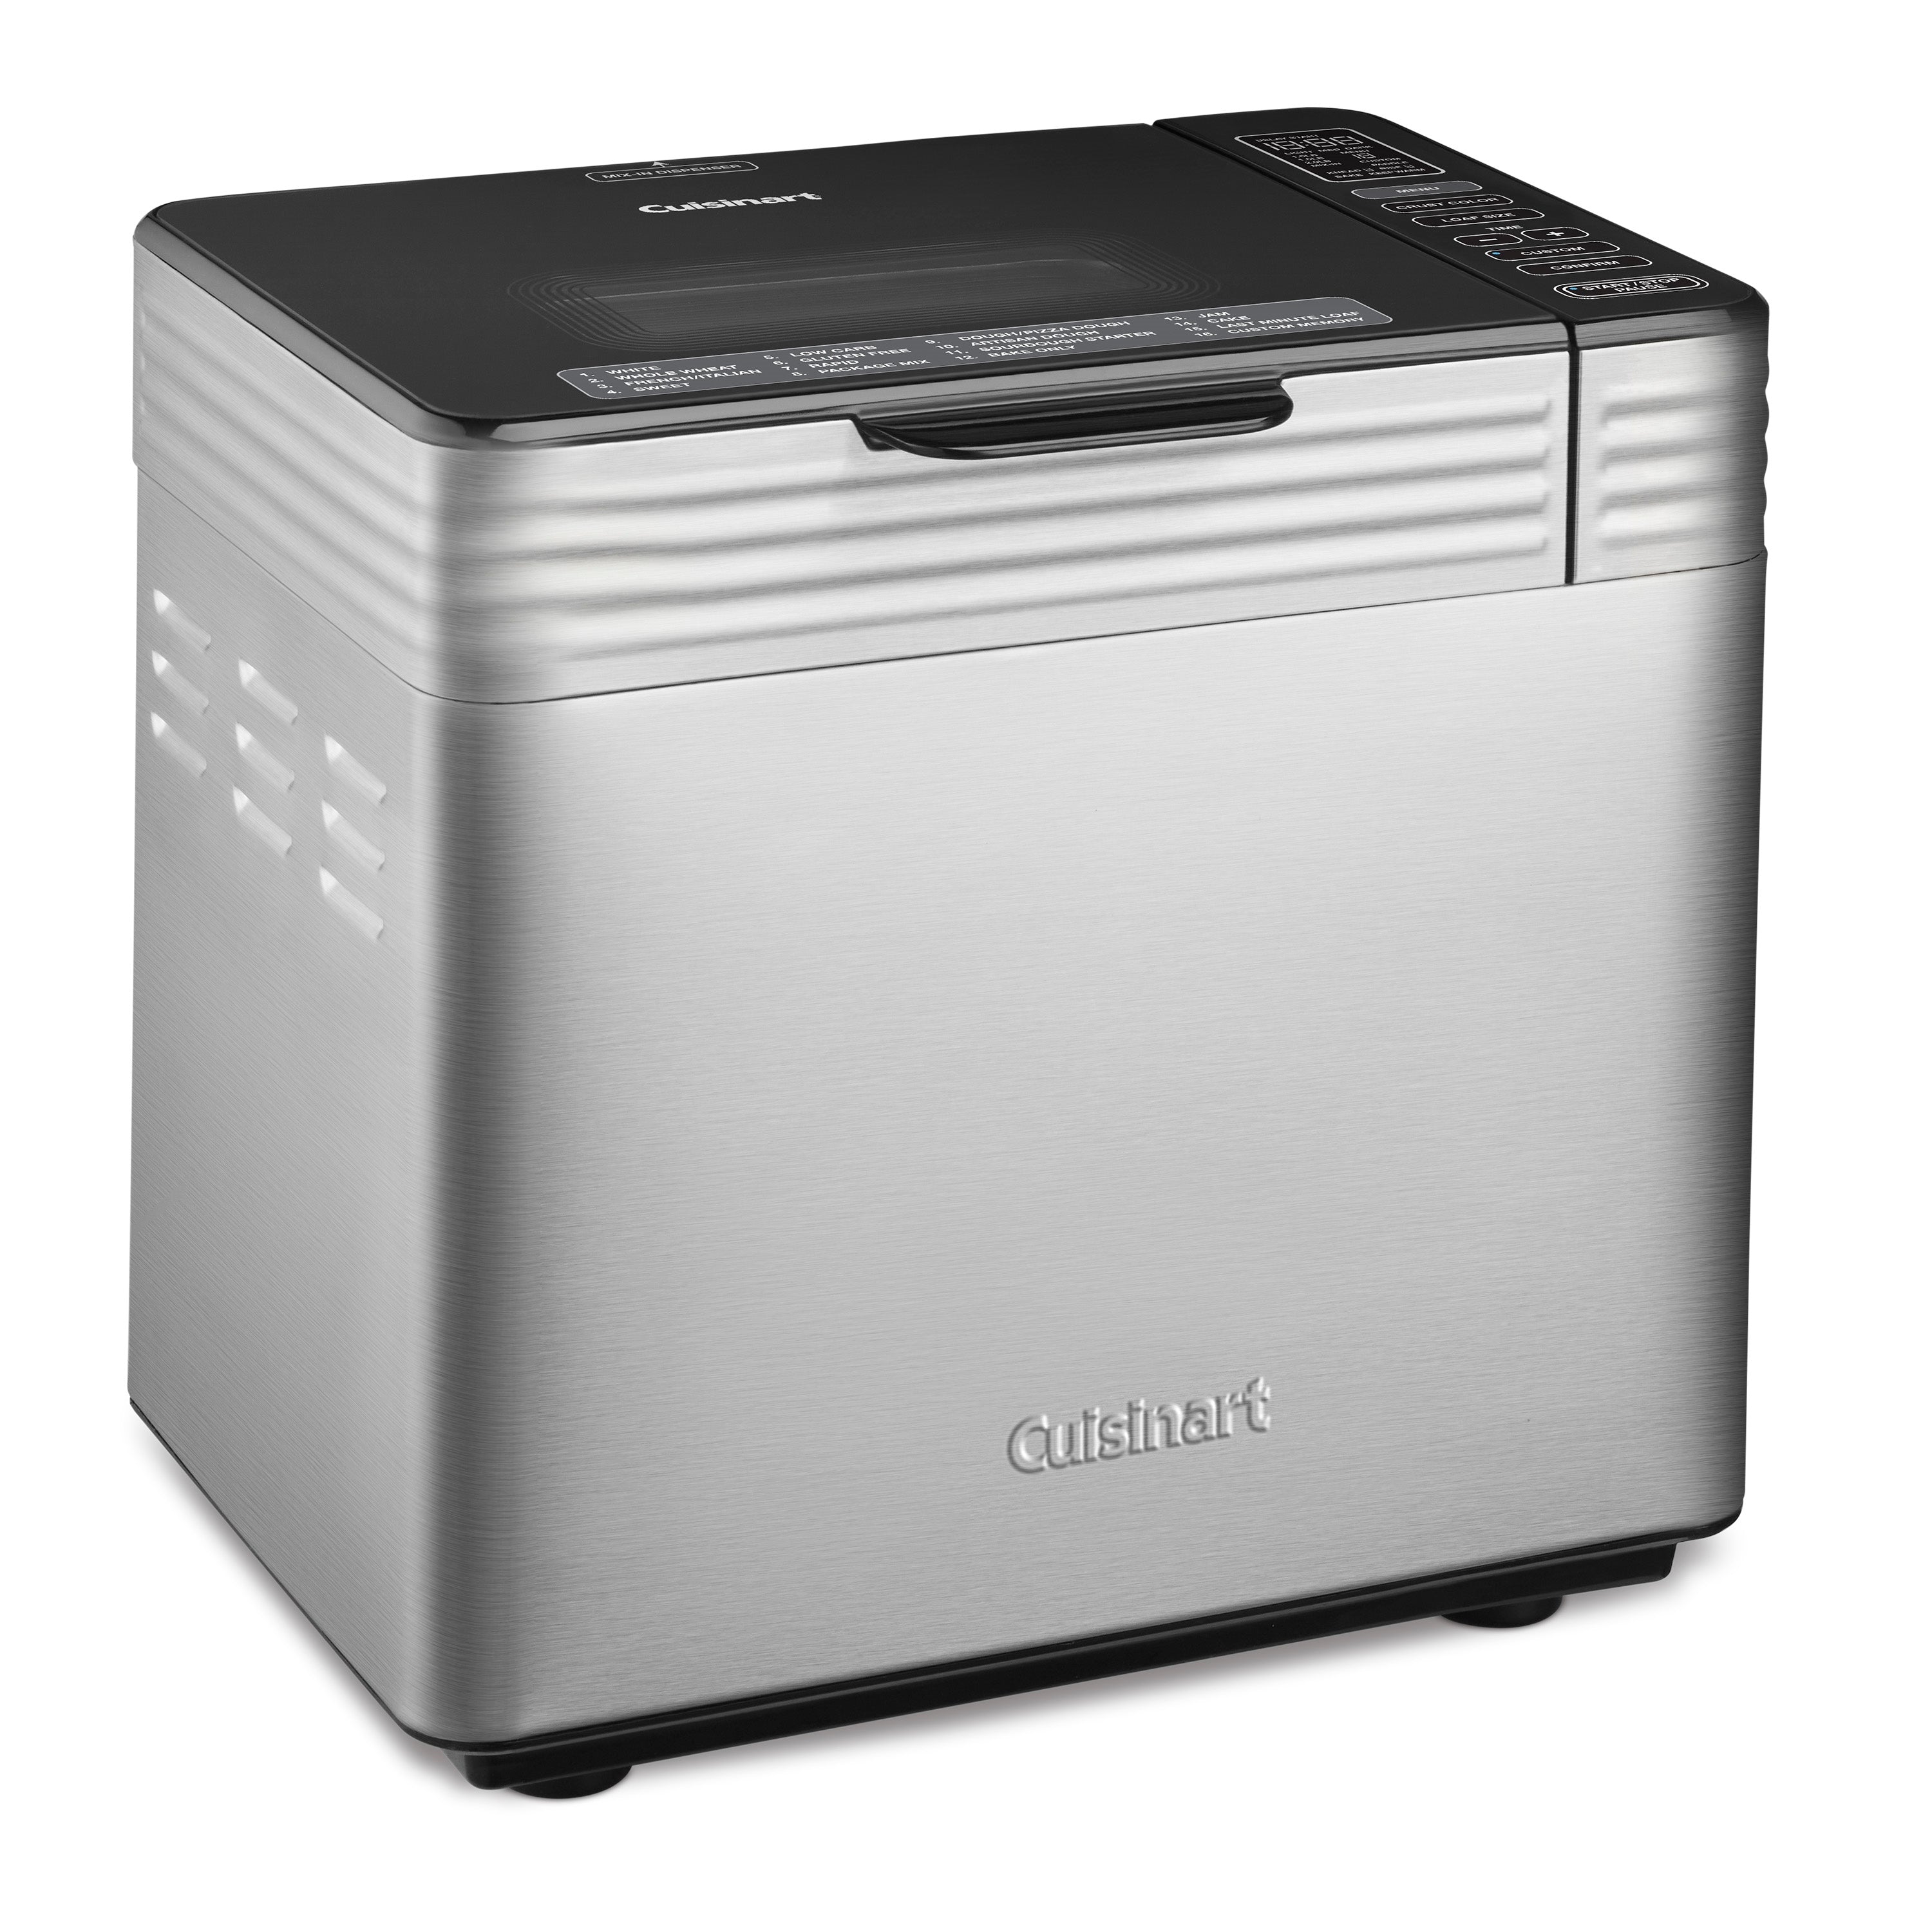 Cuisinart Compact Automatic 2 lbs. Bread Maker